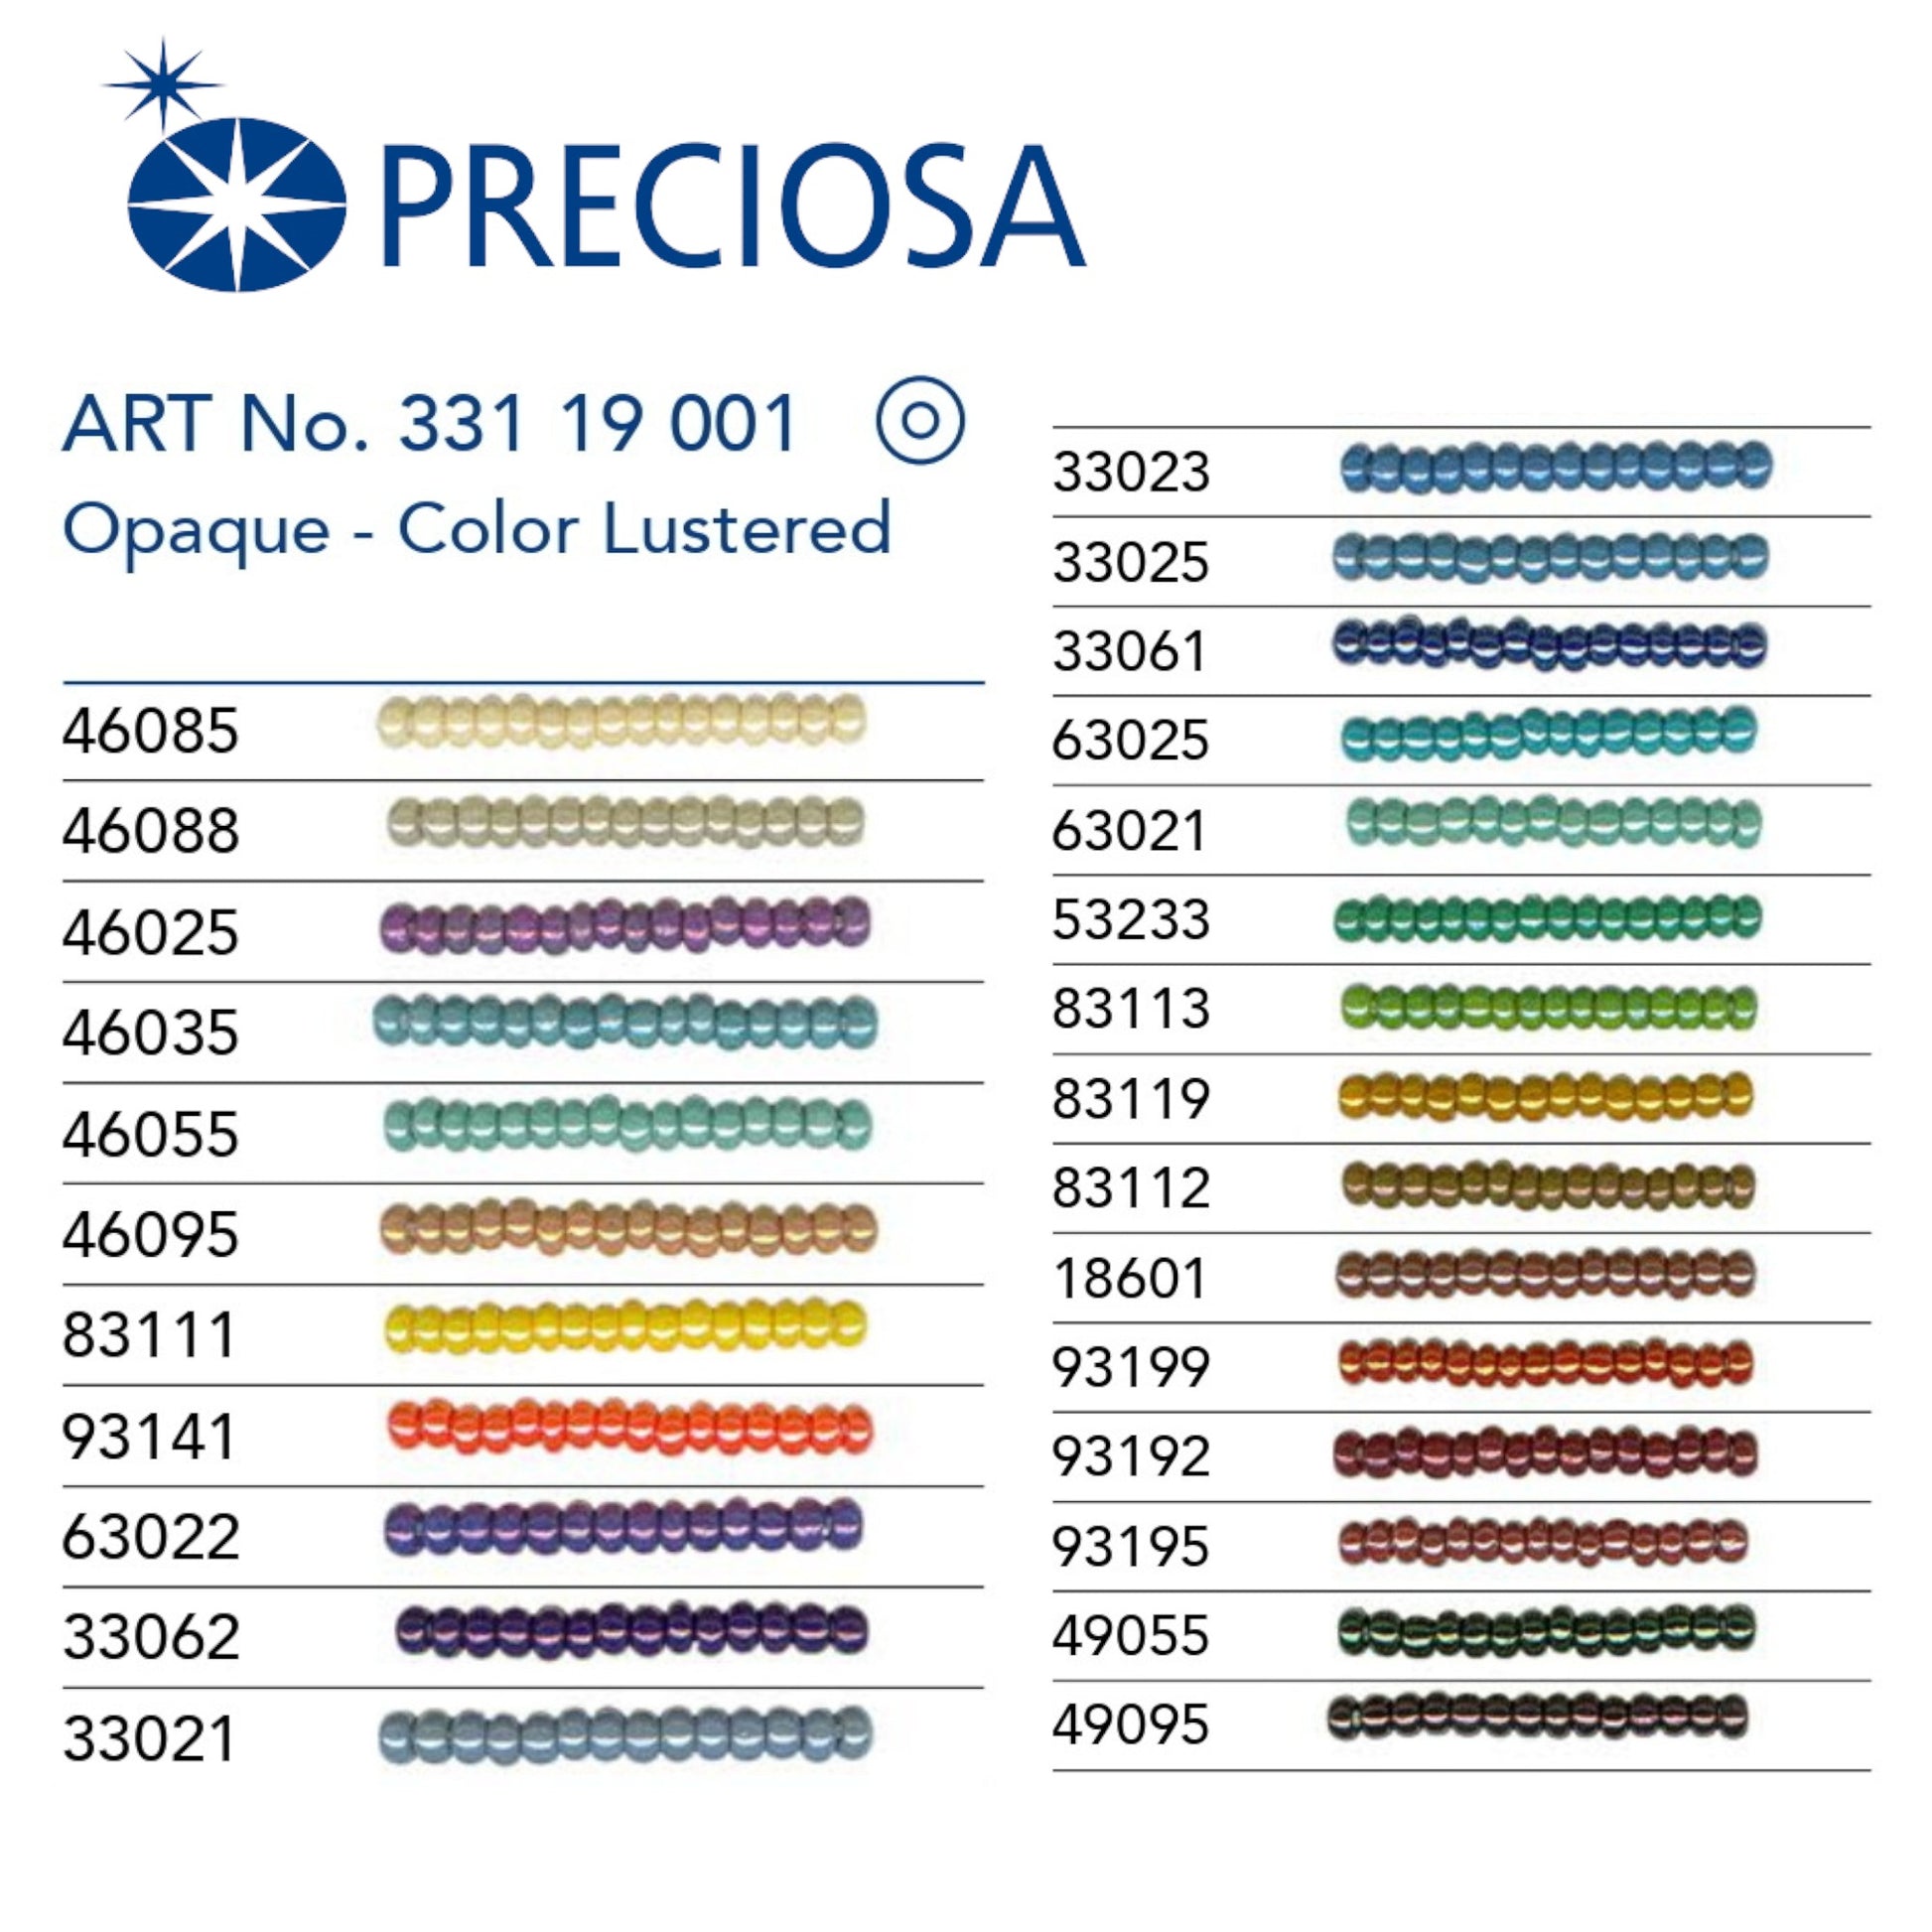 33062 Czech Seed Beads Preciosa Rocailes Opaque - Color Lustered - VadymShop